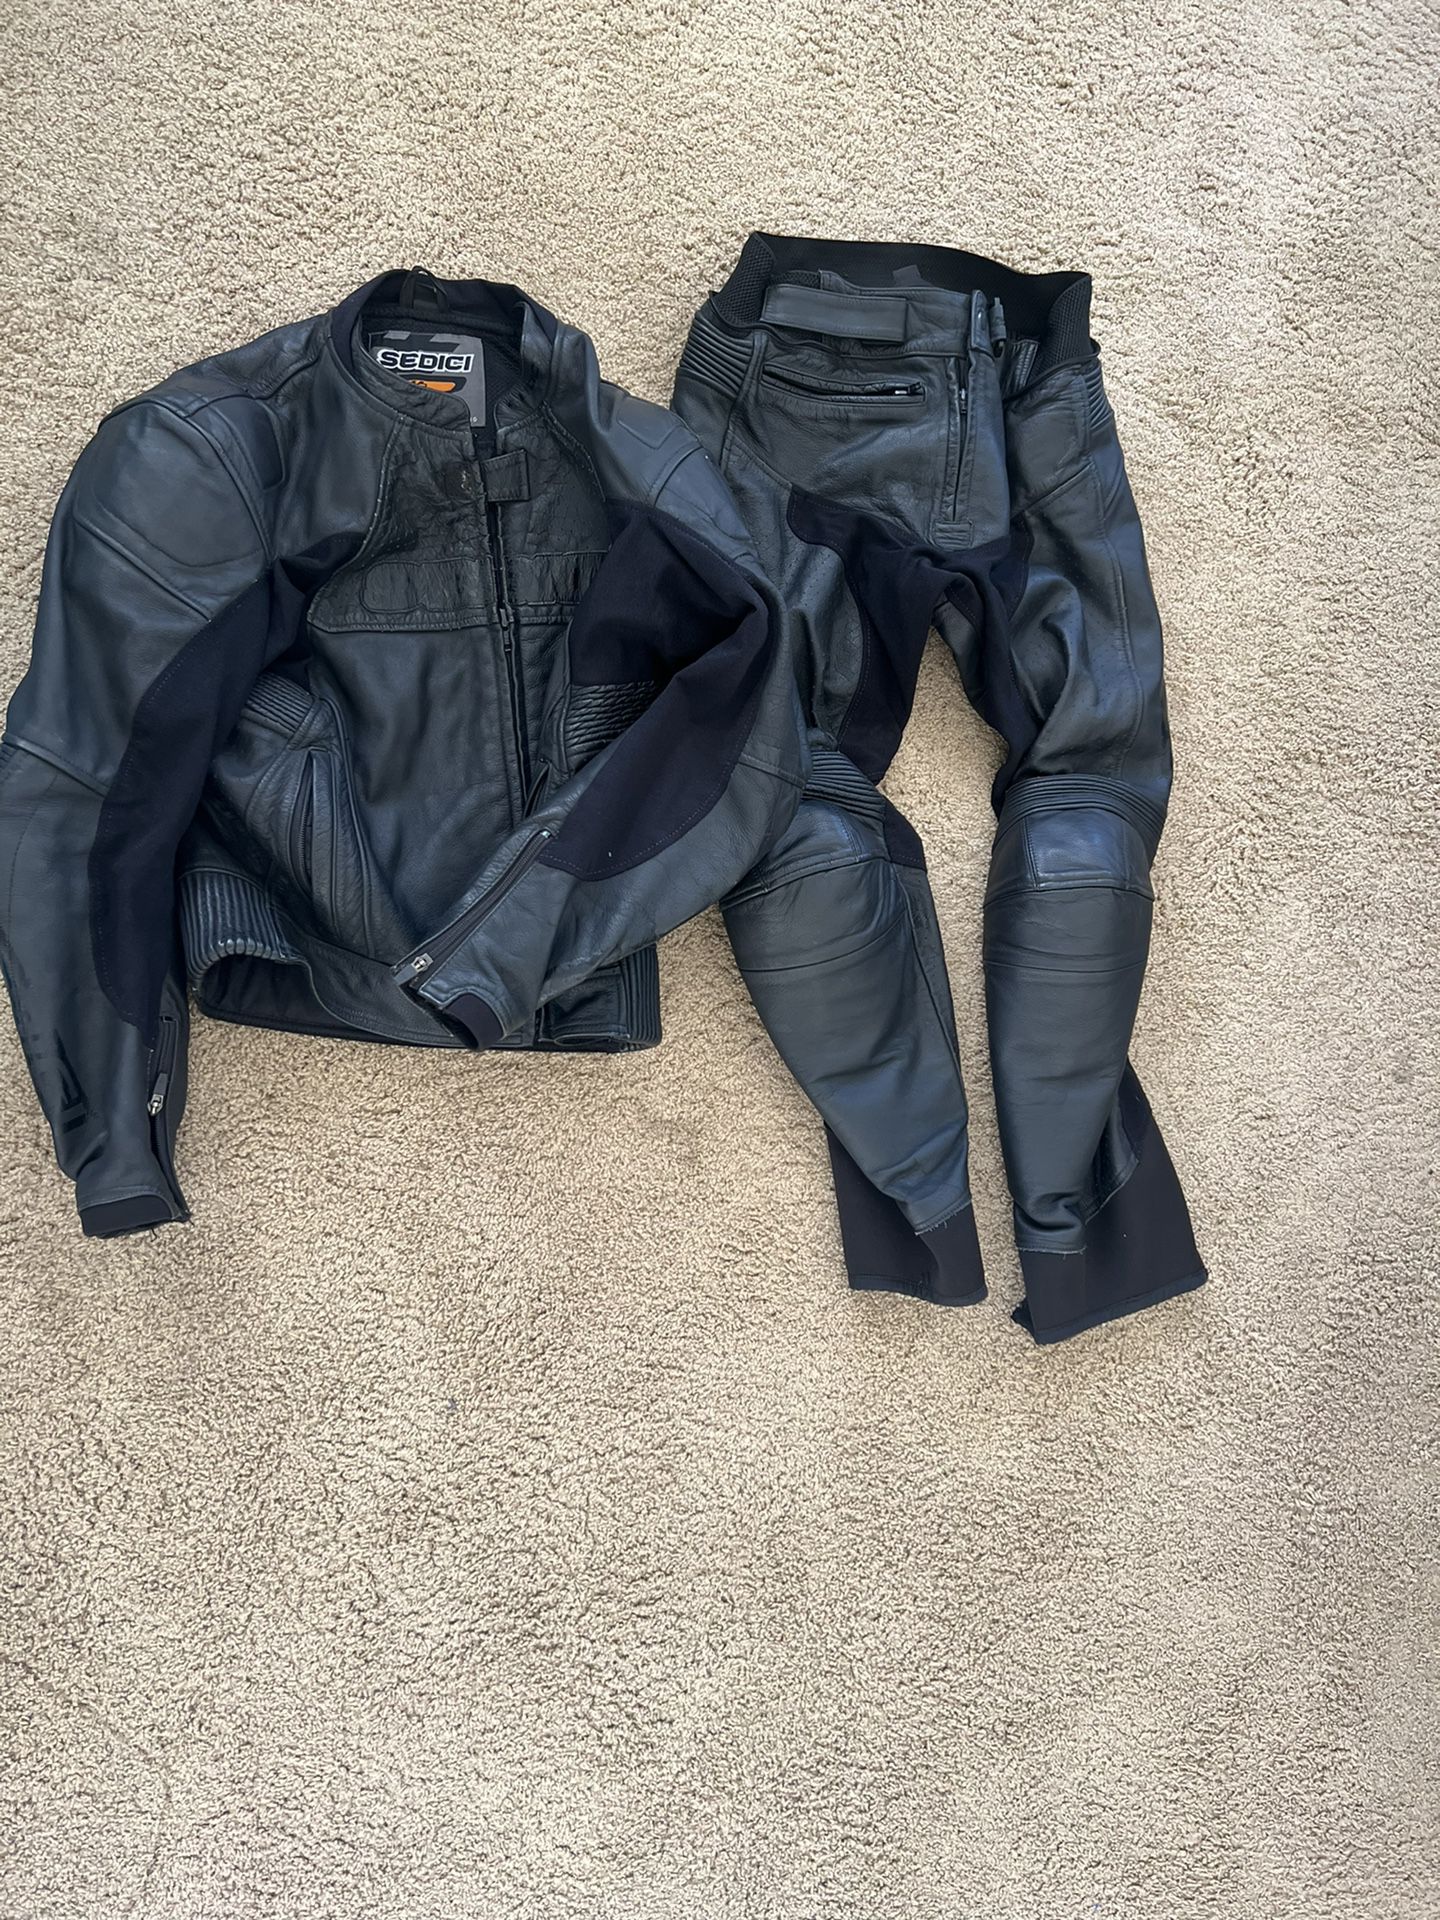 Sedici Full Body Motorcycle Suit (padded) Size 32 